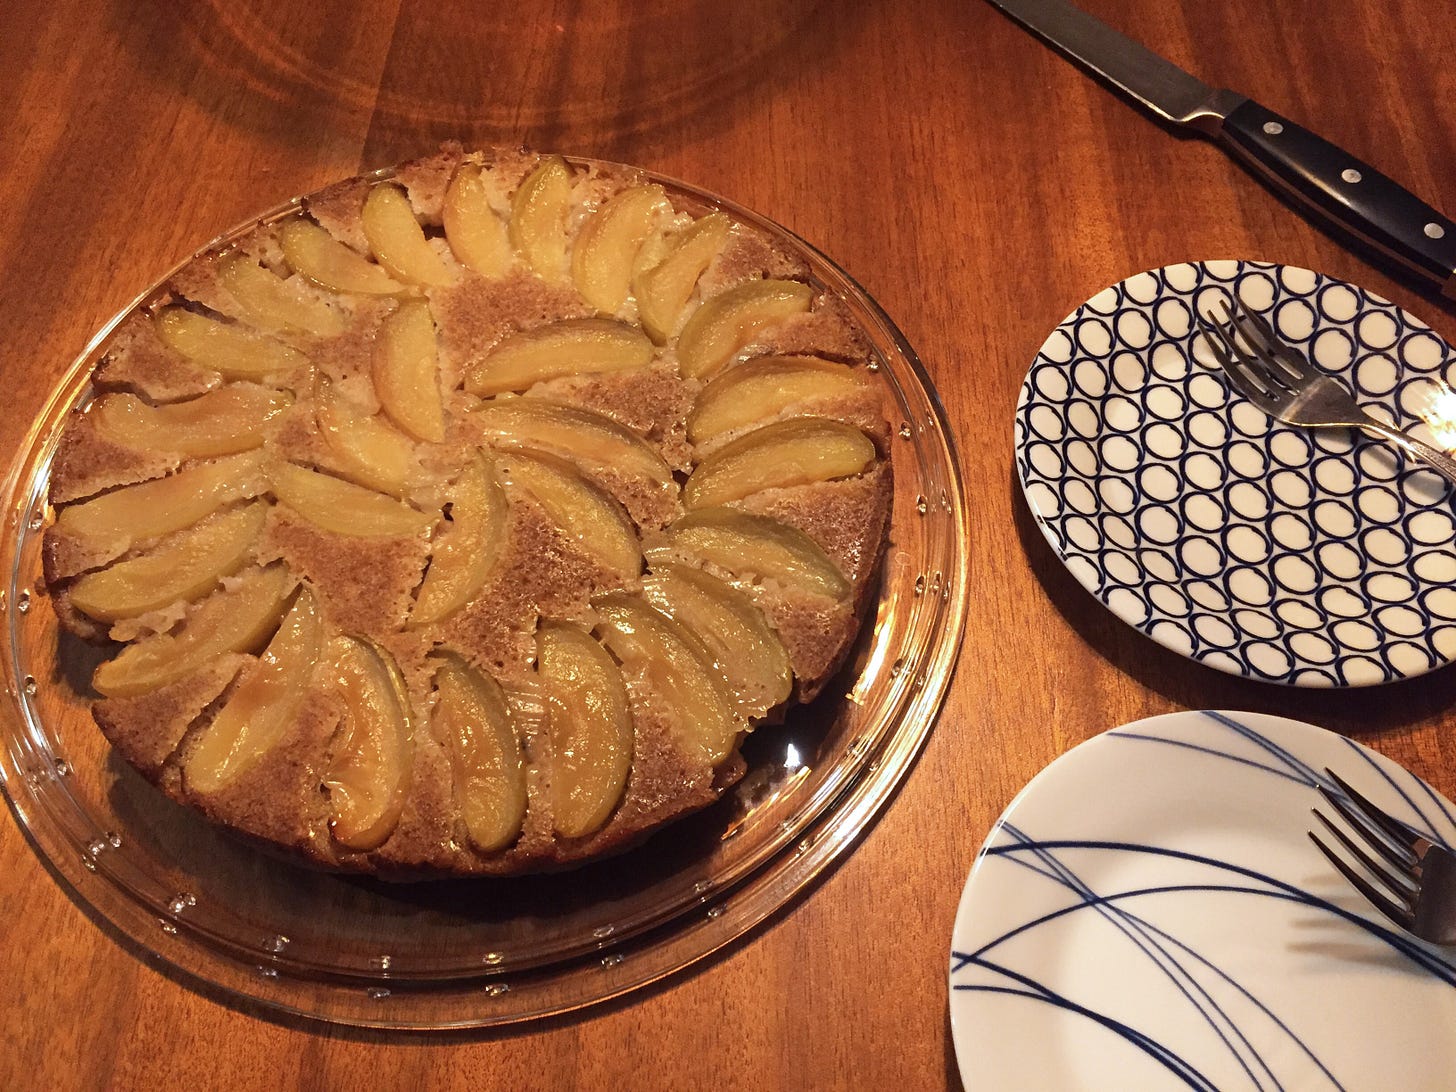 on a cake plate, a craggy apple cake with a spiral of apple slices. Next to it are two dessert plates with forks on them, and above them is a large knife to cut the cake.